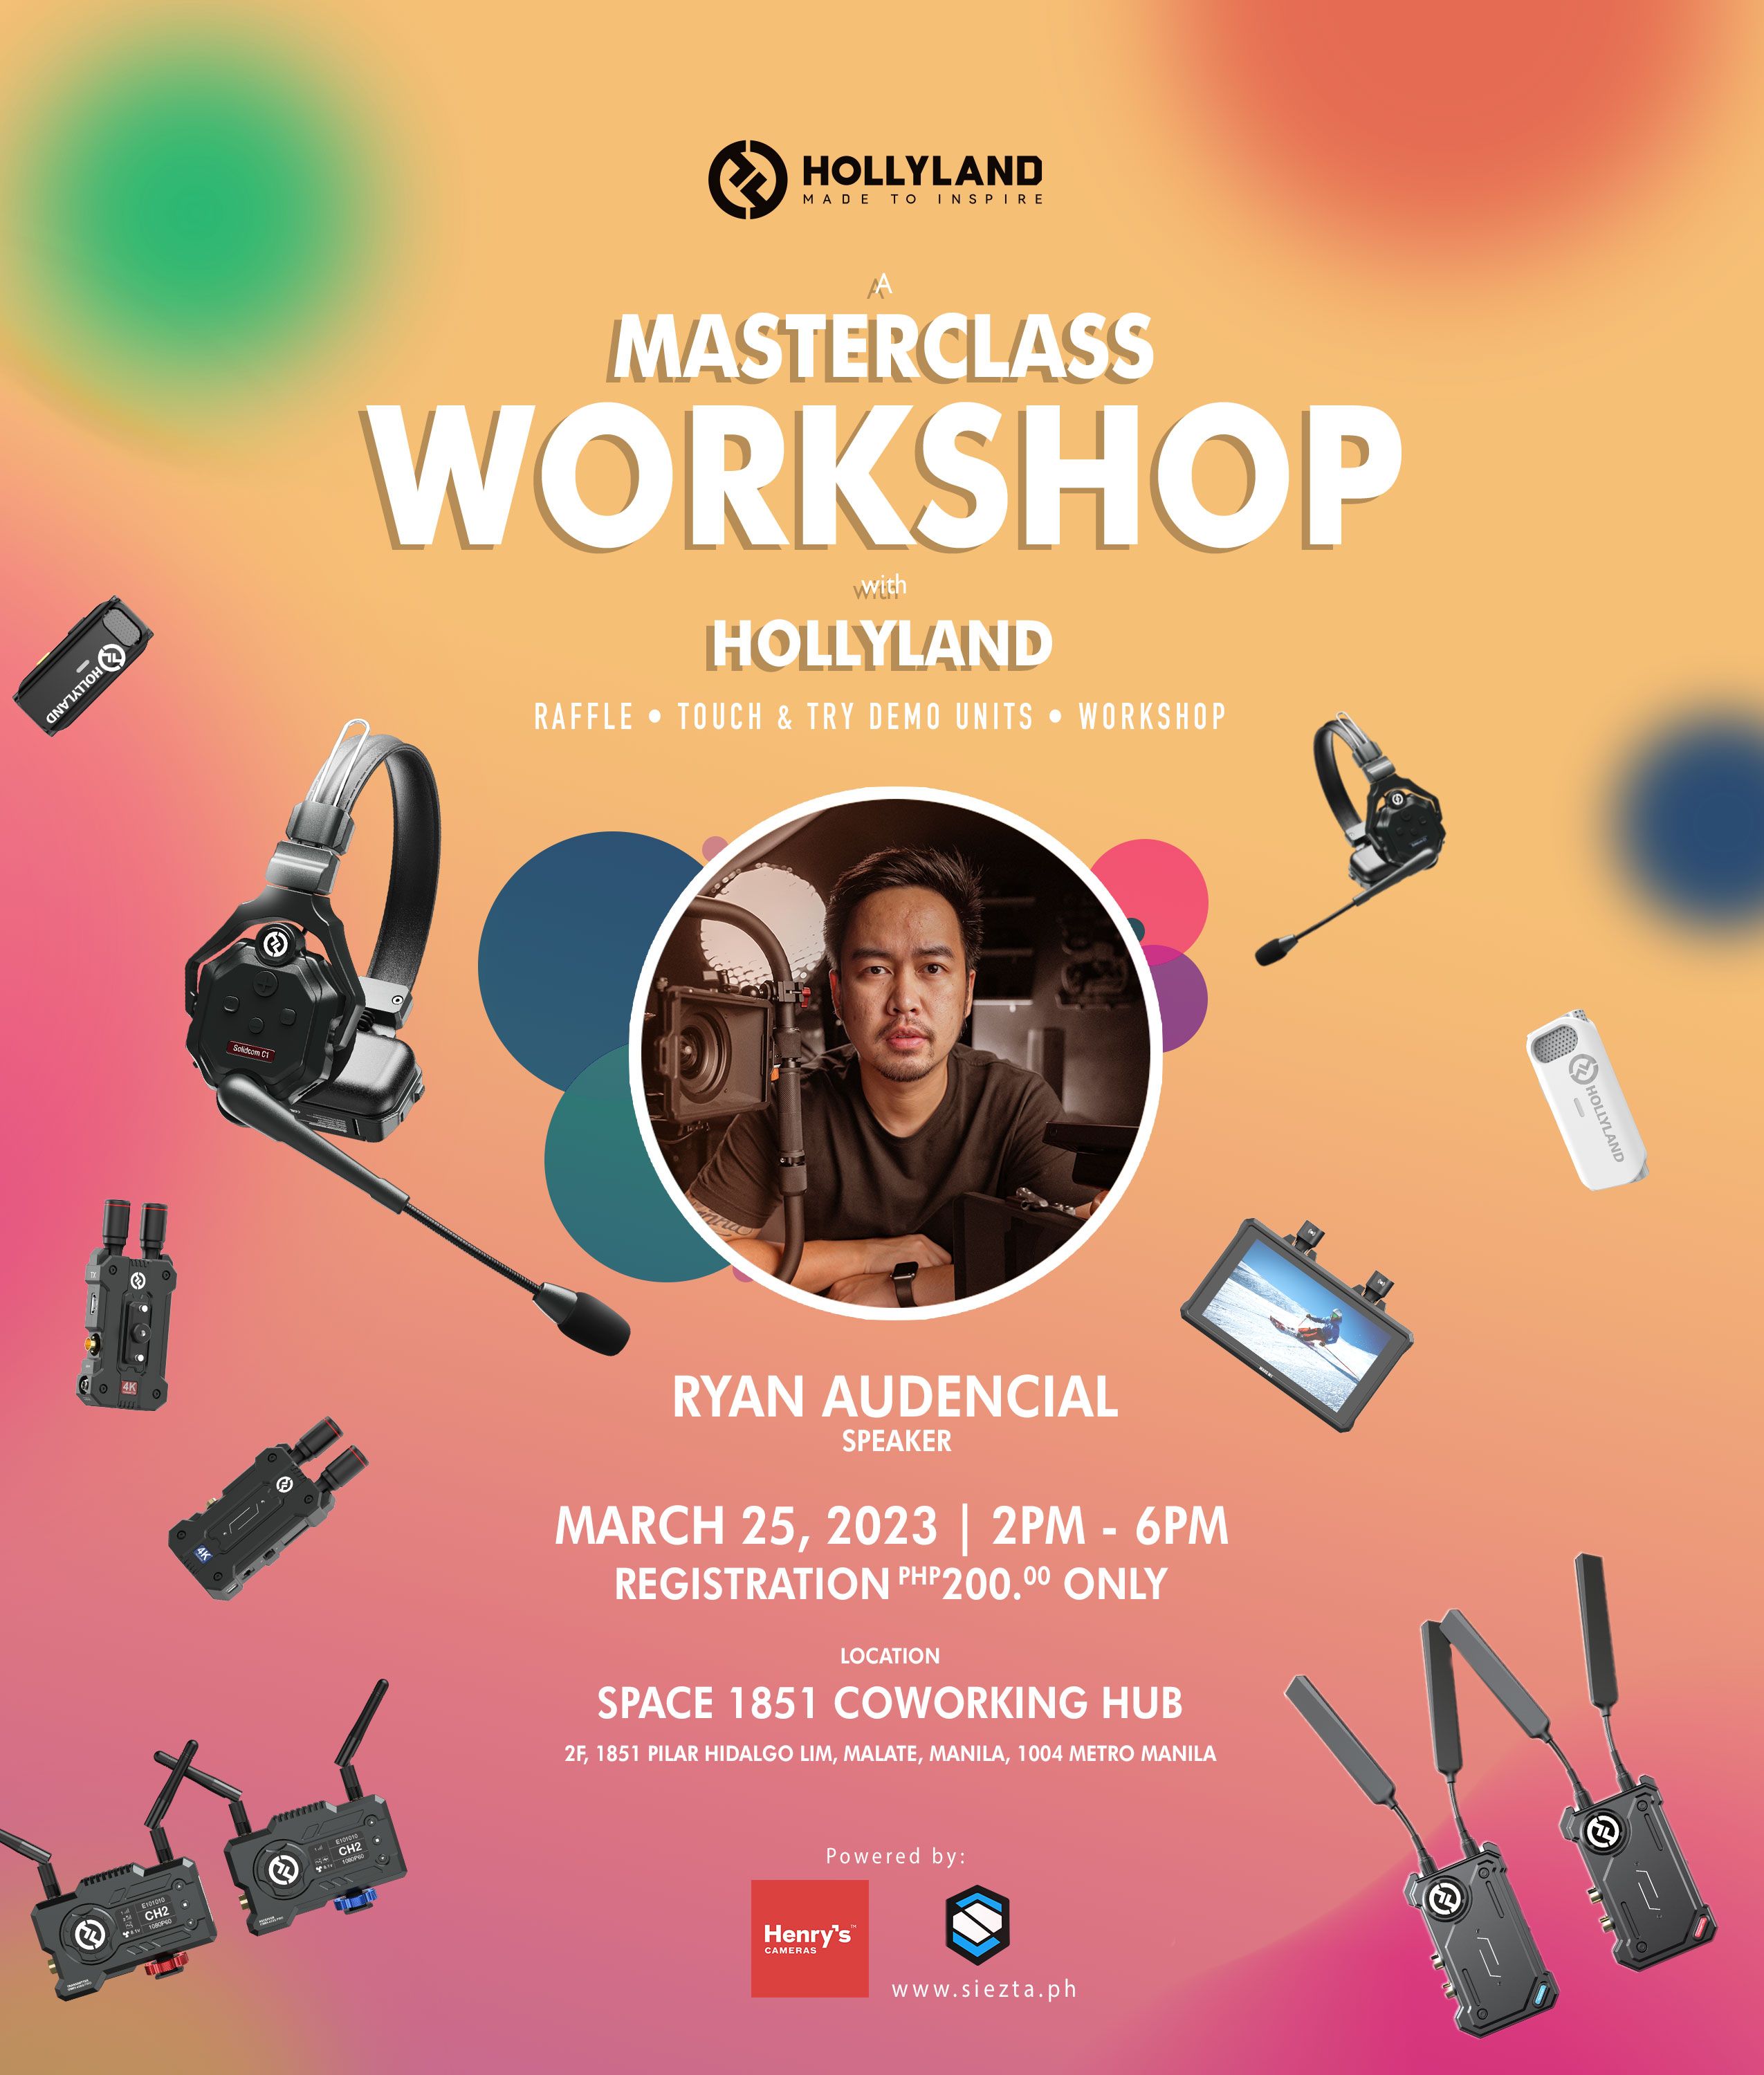 Masterclass Workshop with Hollyland